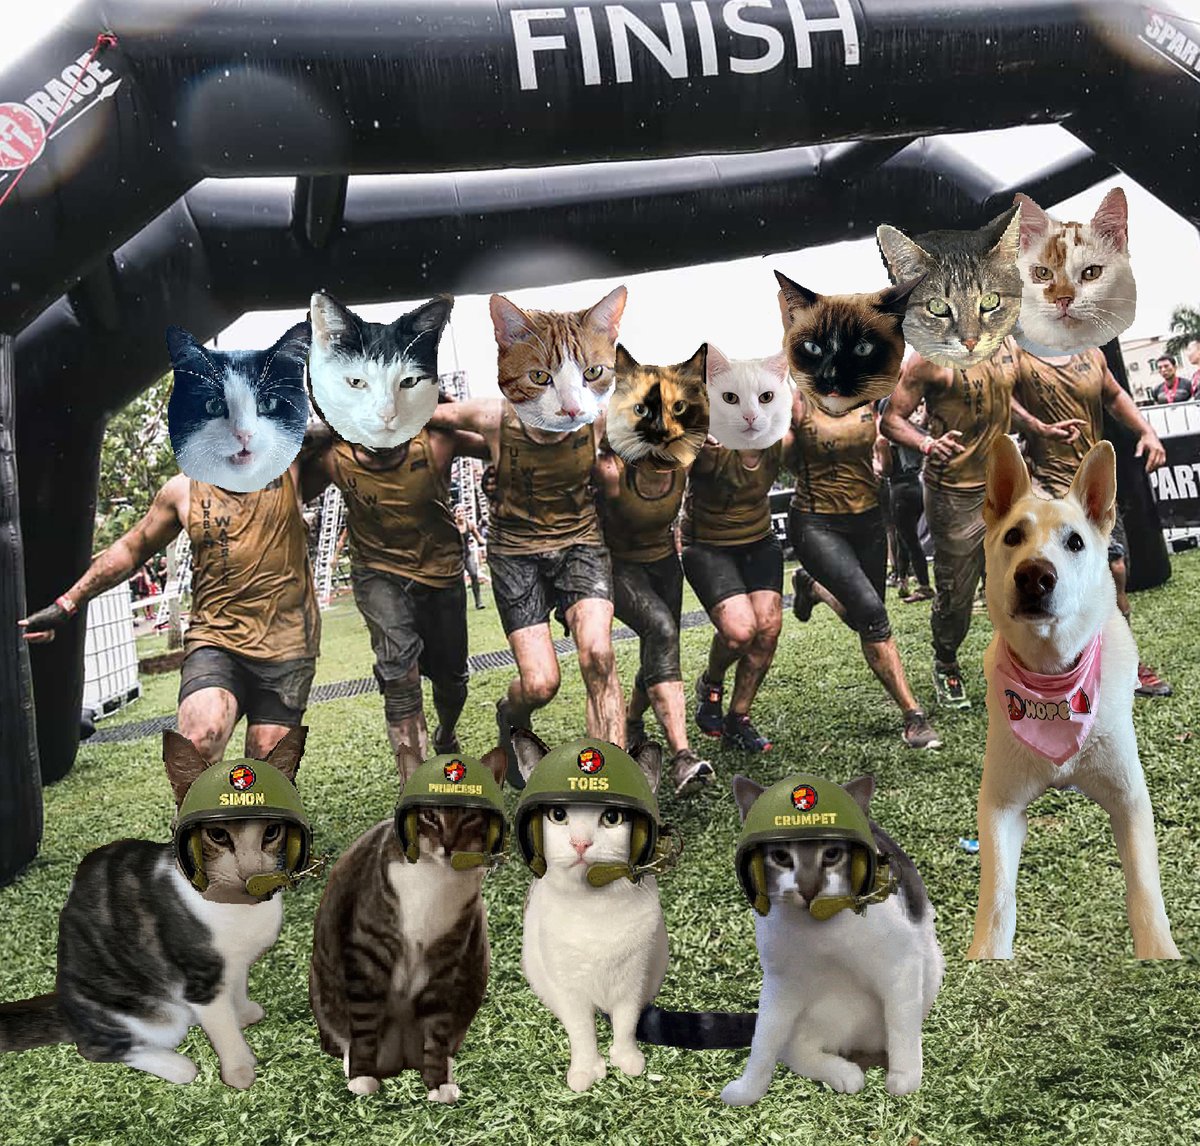 #zzst @catsrule0 @MauSupercat @JennyNicholas4 @GeneralBazz @gensbazzbiddy @AviwhiteGSD WOW. can you believe we all finished the course. We all dah winners. Avi is a great help and very able athlete. Thanks pals for job well done.